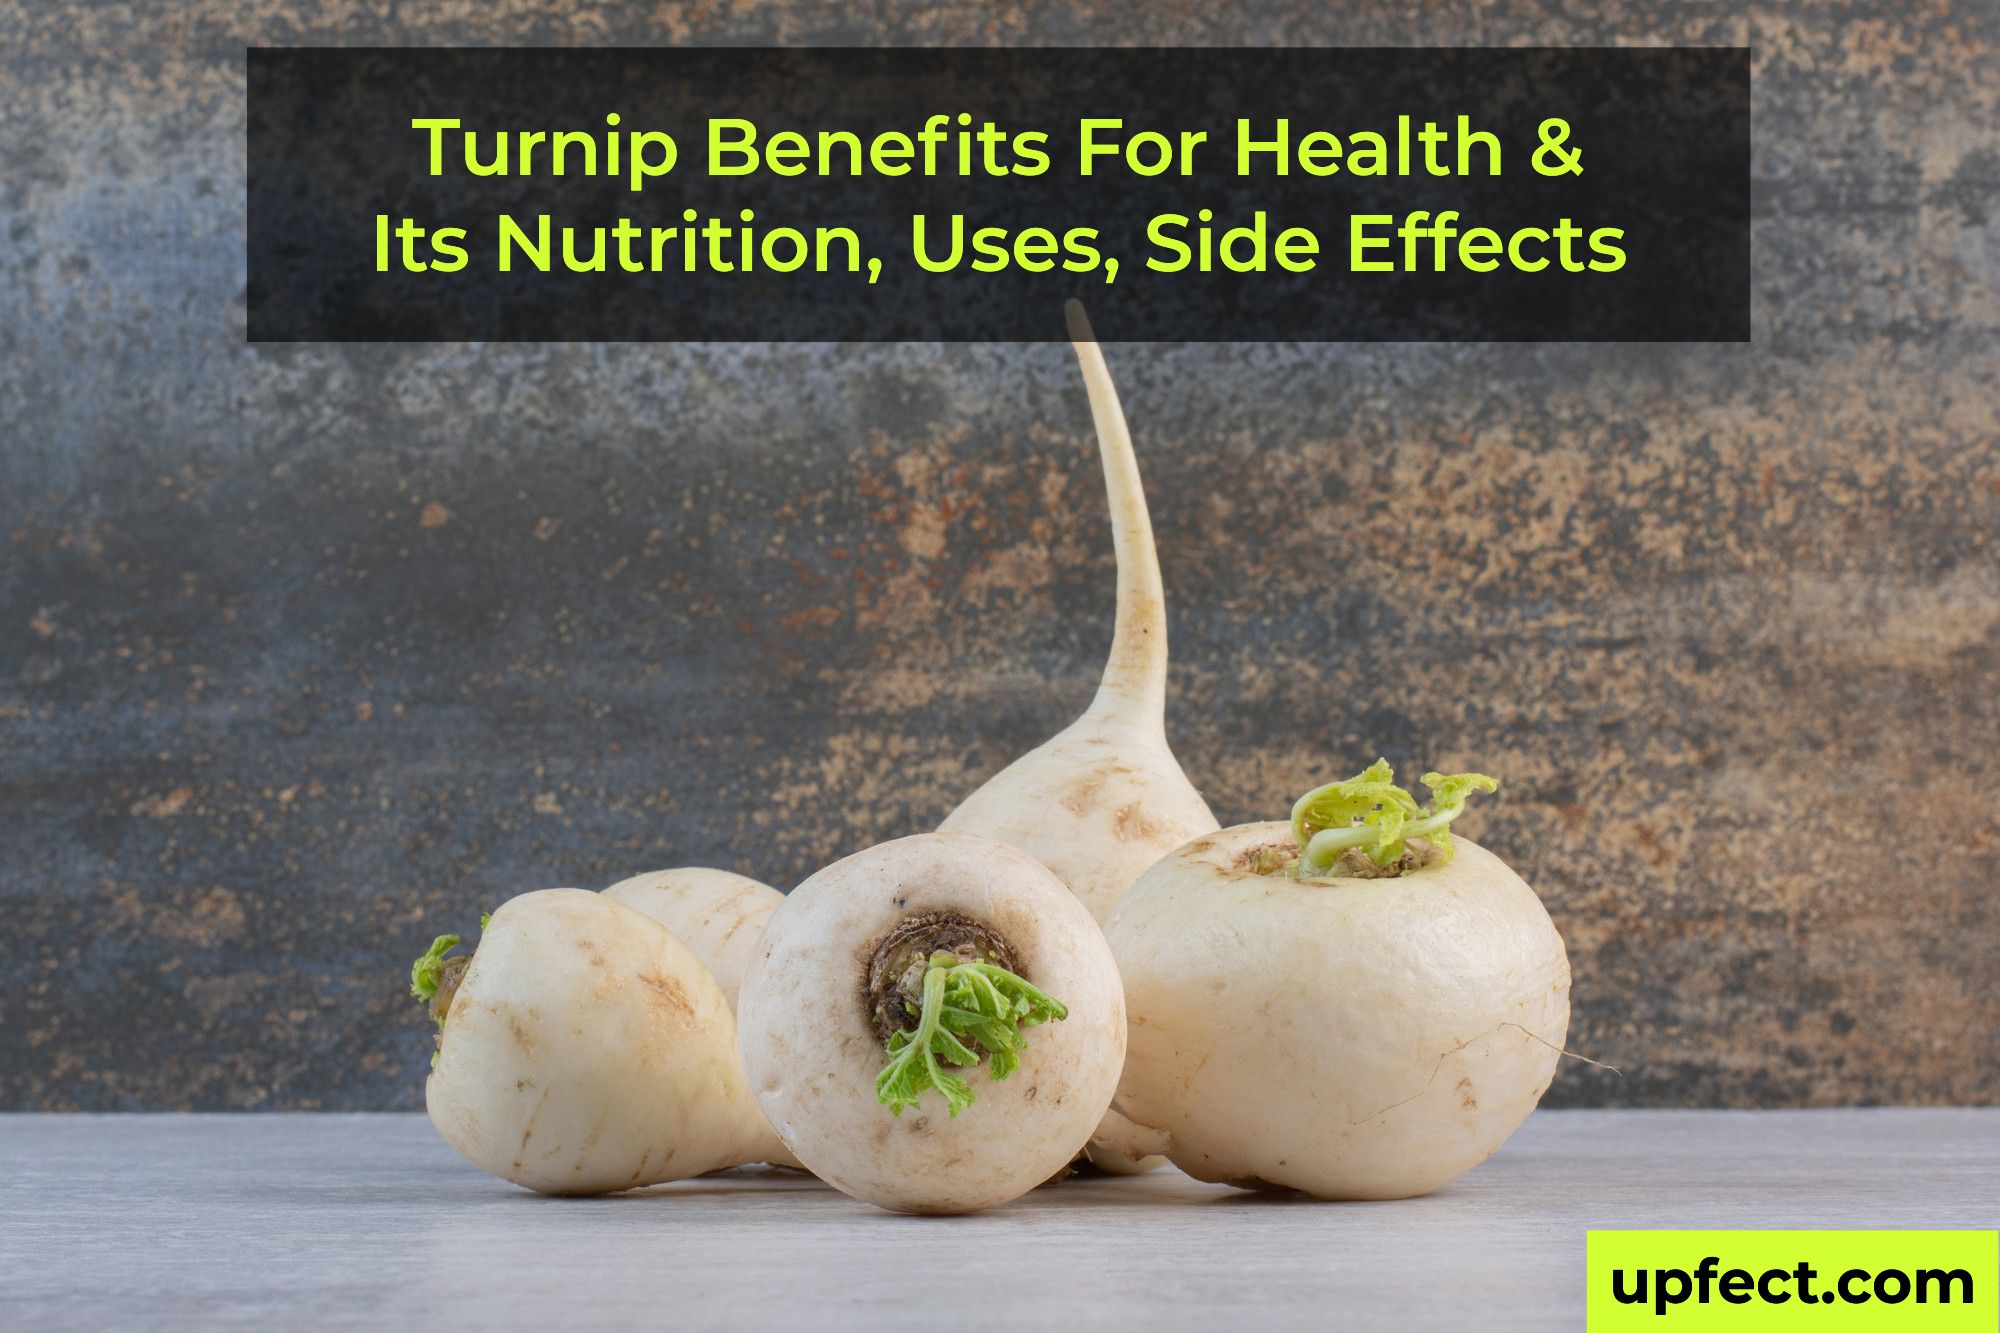 Turnip Benefits For Health & Its Nutrition, Uses, Side Effects